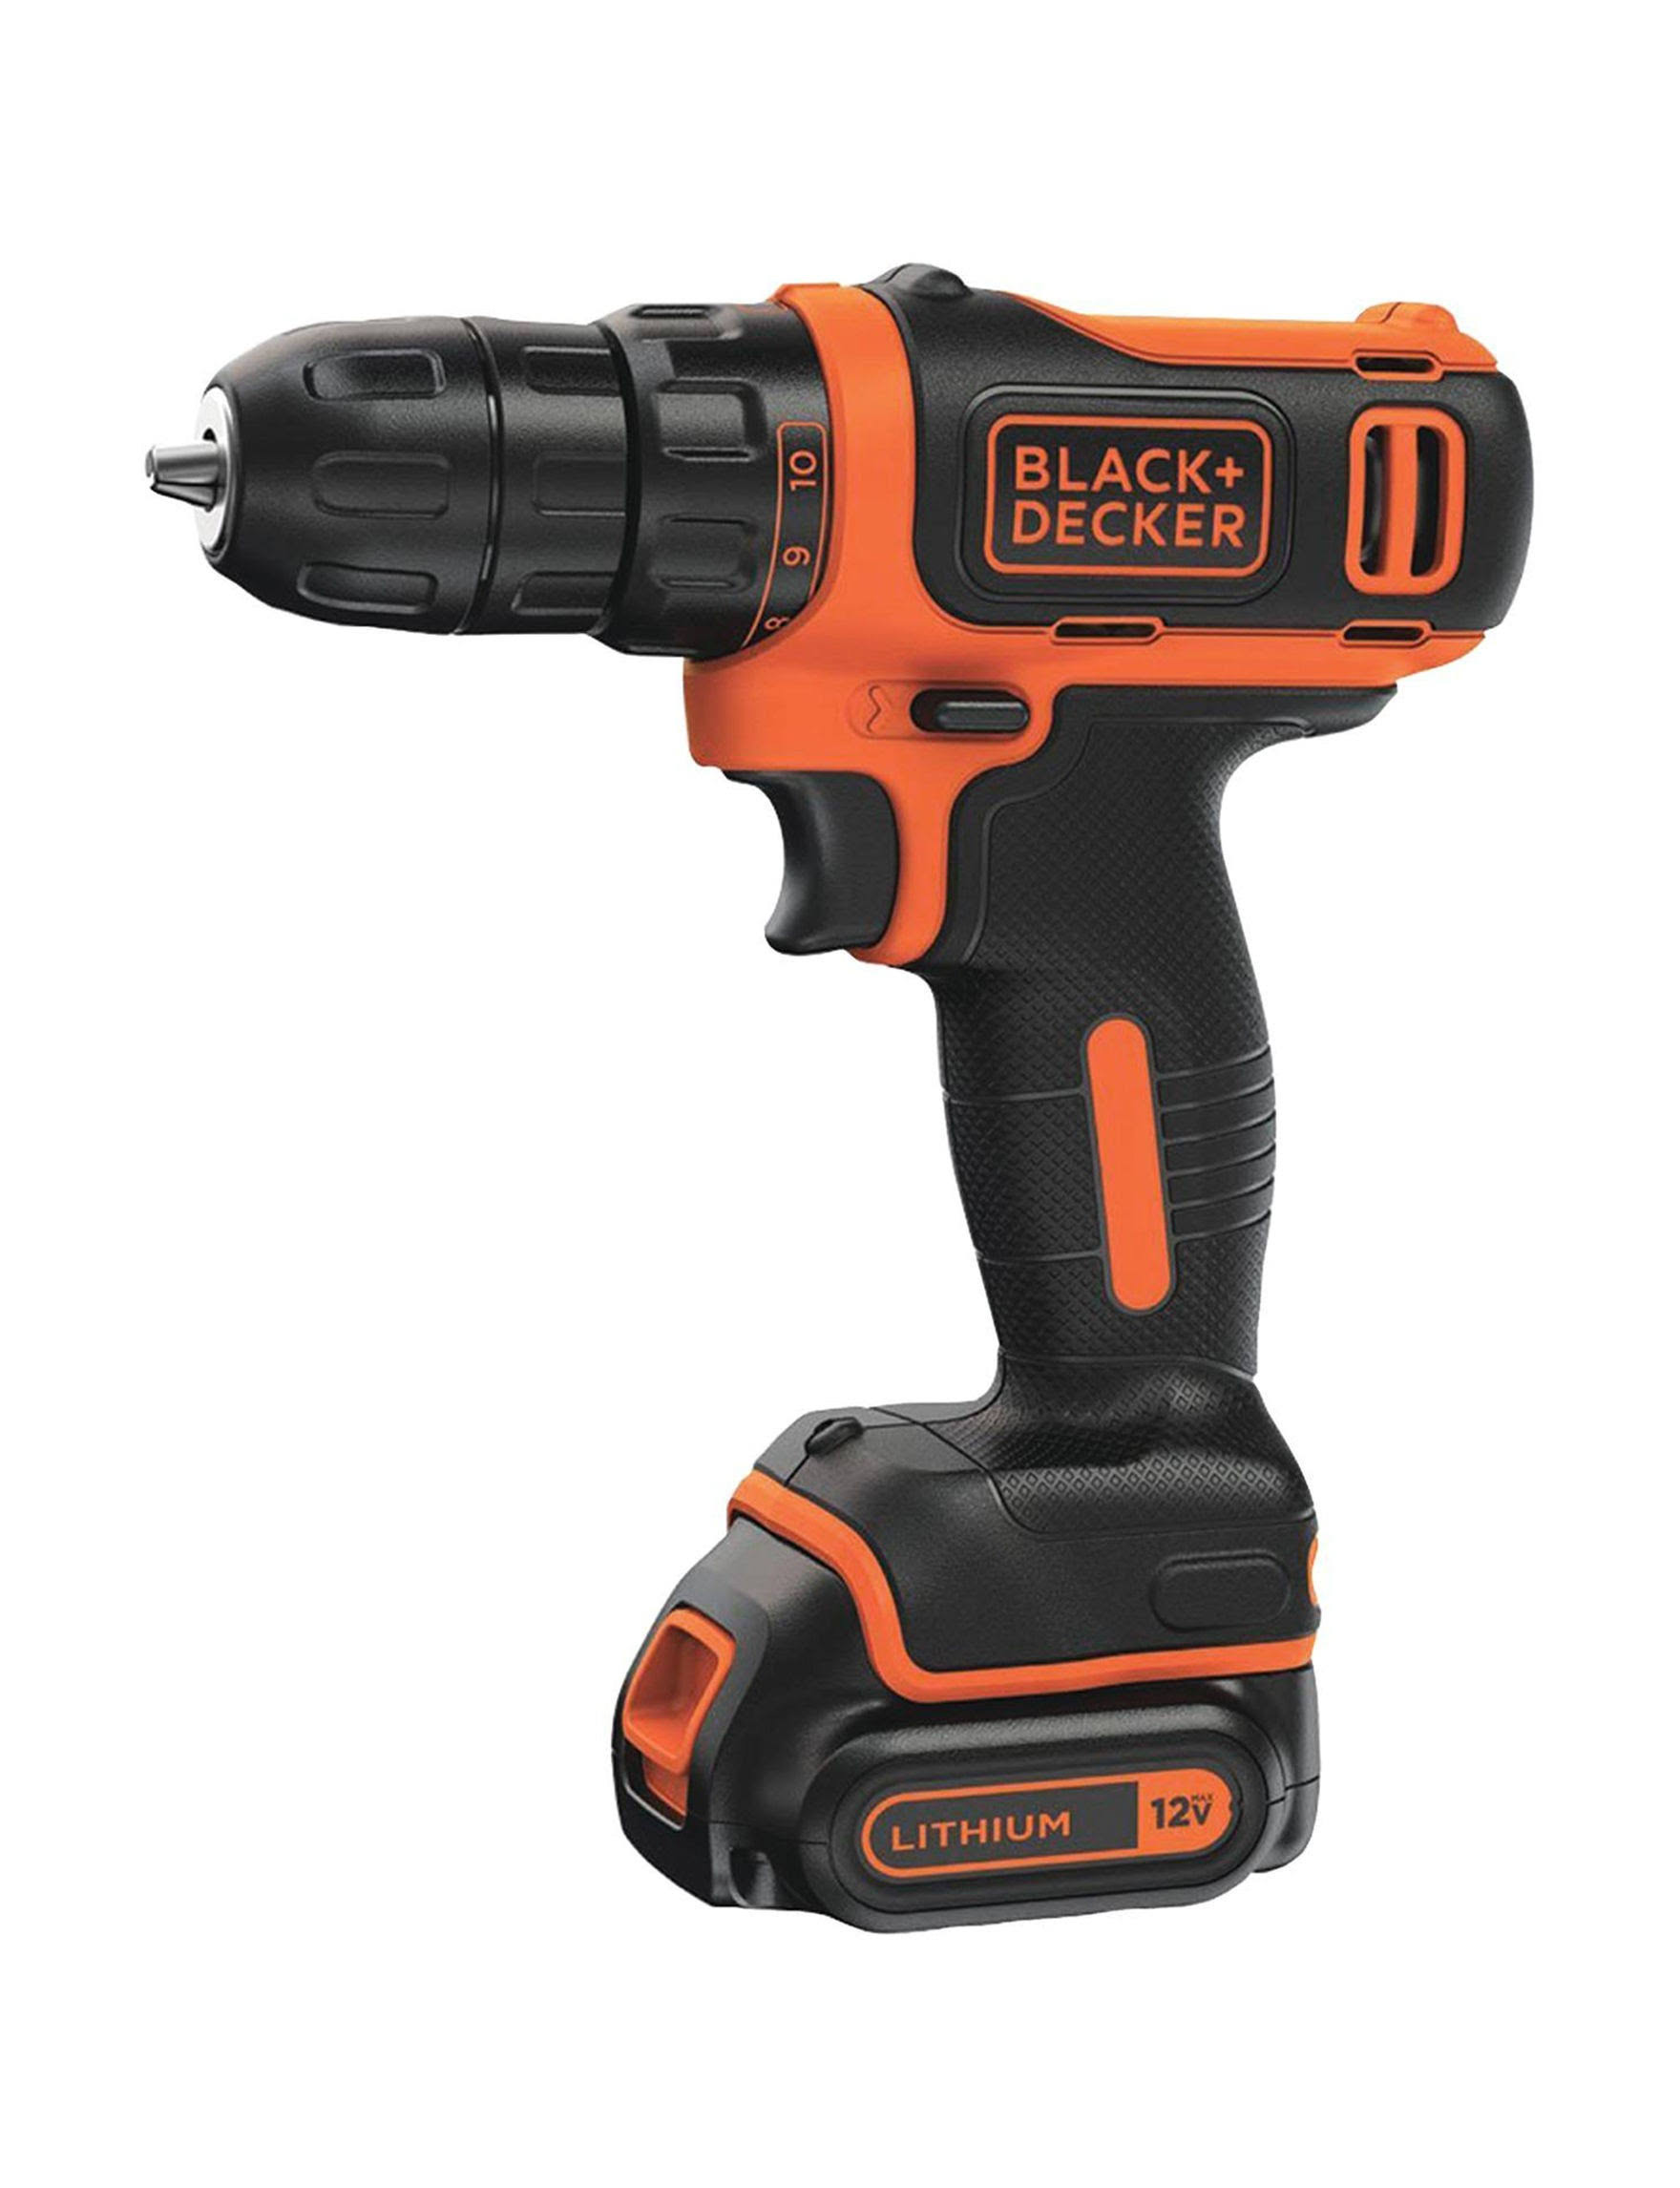 Black and Decker Cordless Lithium Drill and Driver - 12V